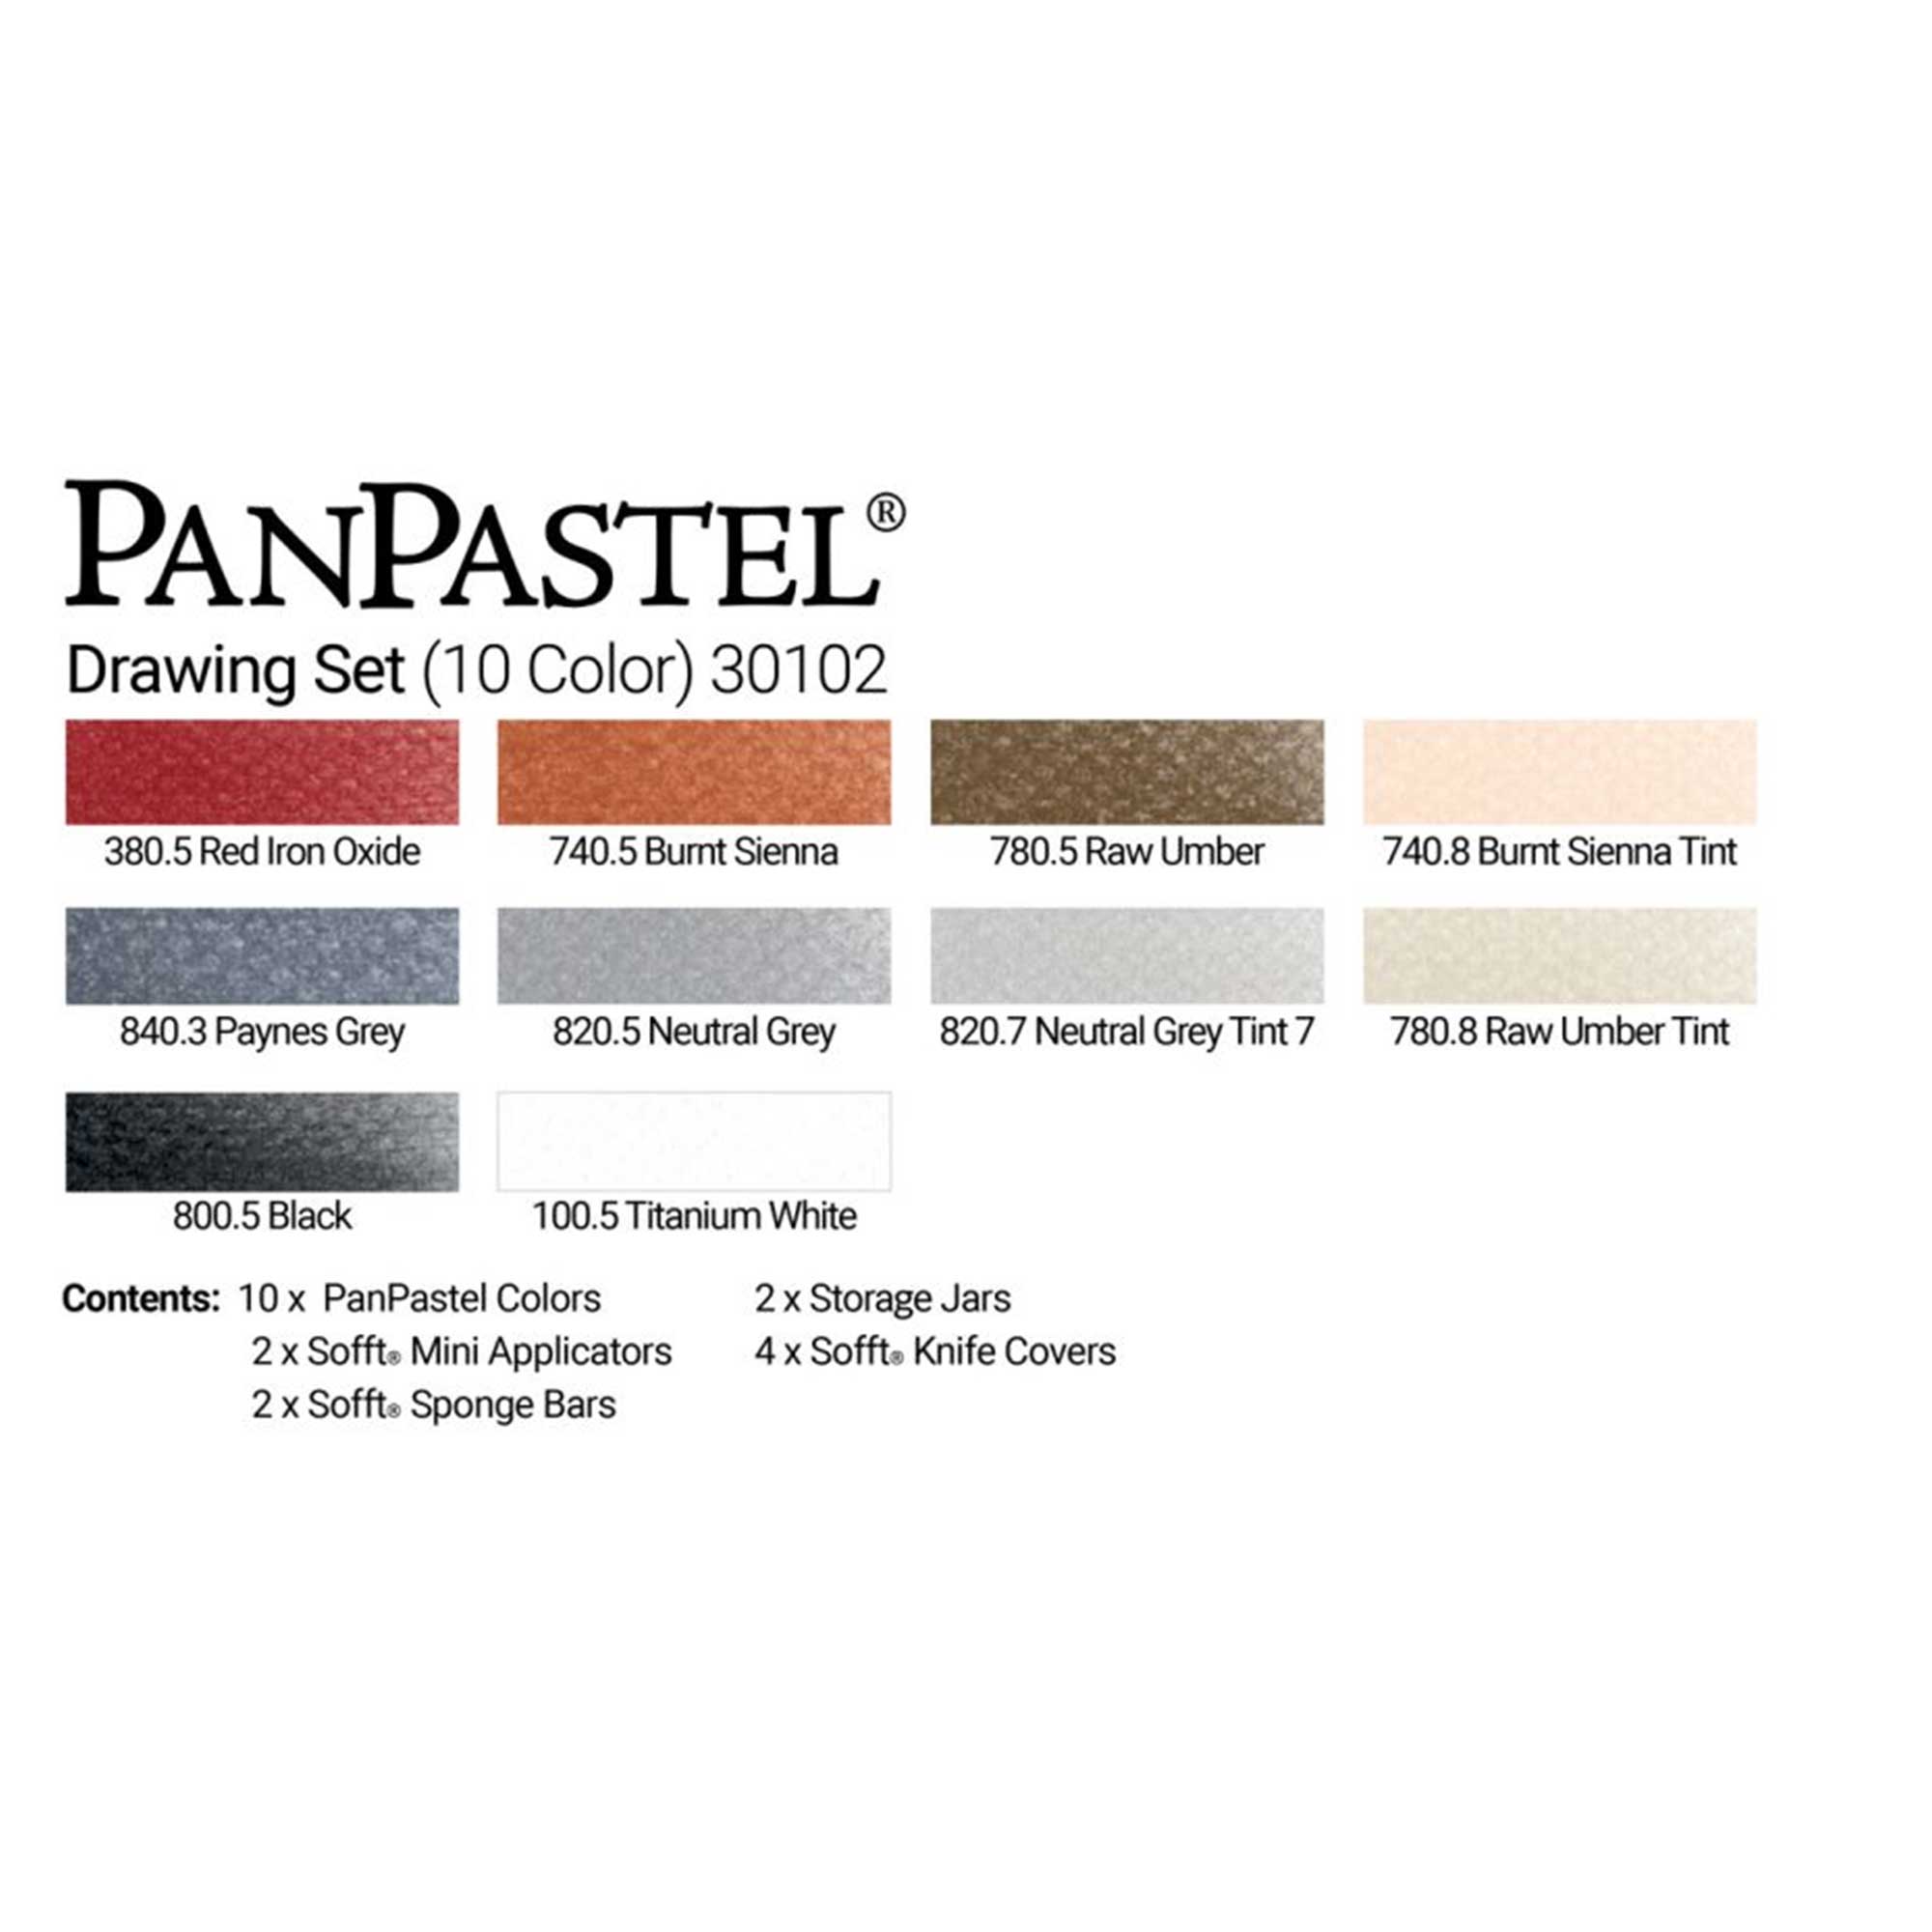 PanPastel Set of 10 - DRAWING - Colour Swatches